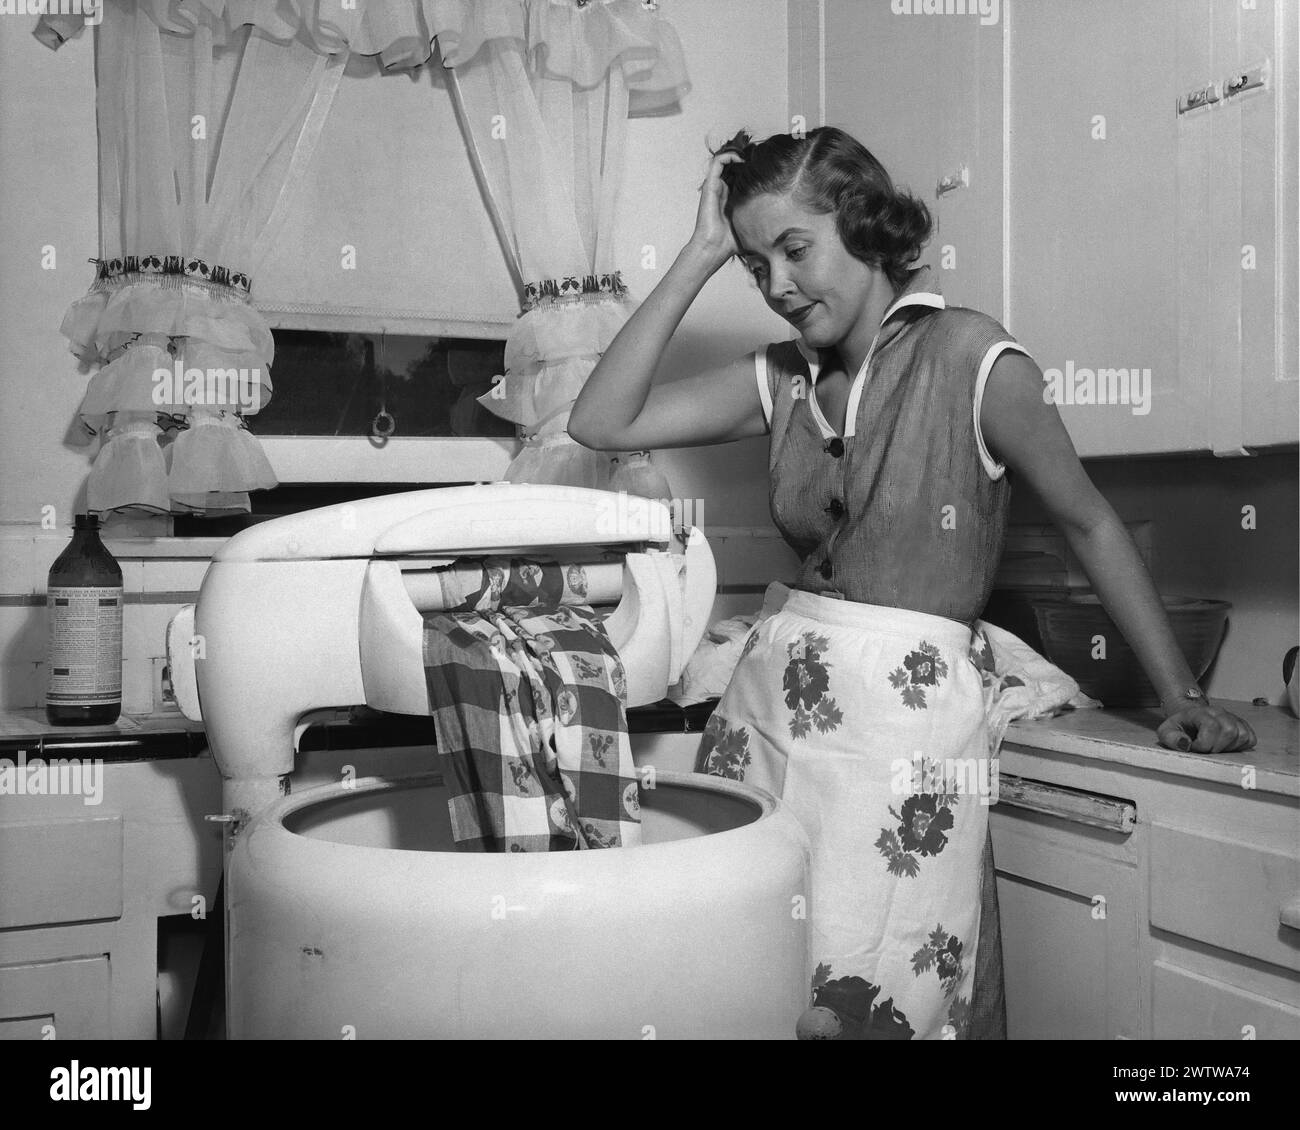 Young woman, well-dressed, with an apron on standing her kitchen looking exhausted while taking a break from washing laundry in a manual washtub Stock Photo